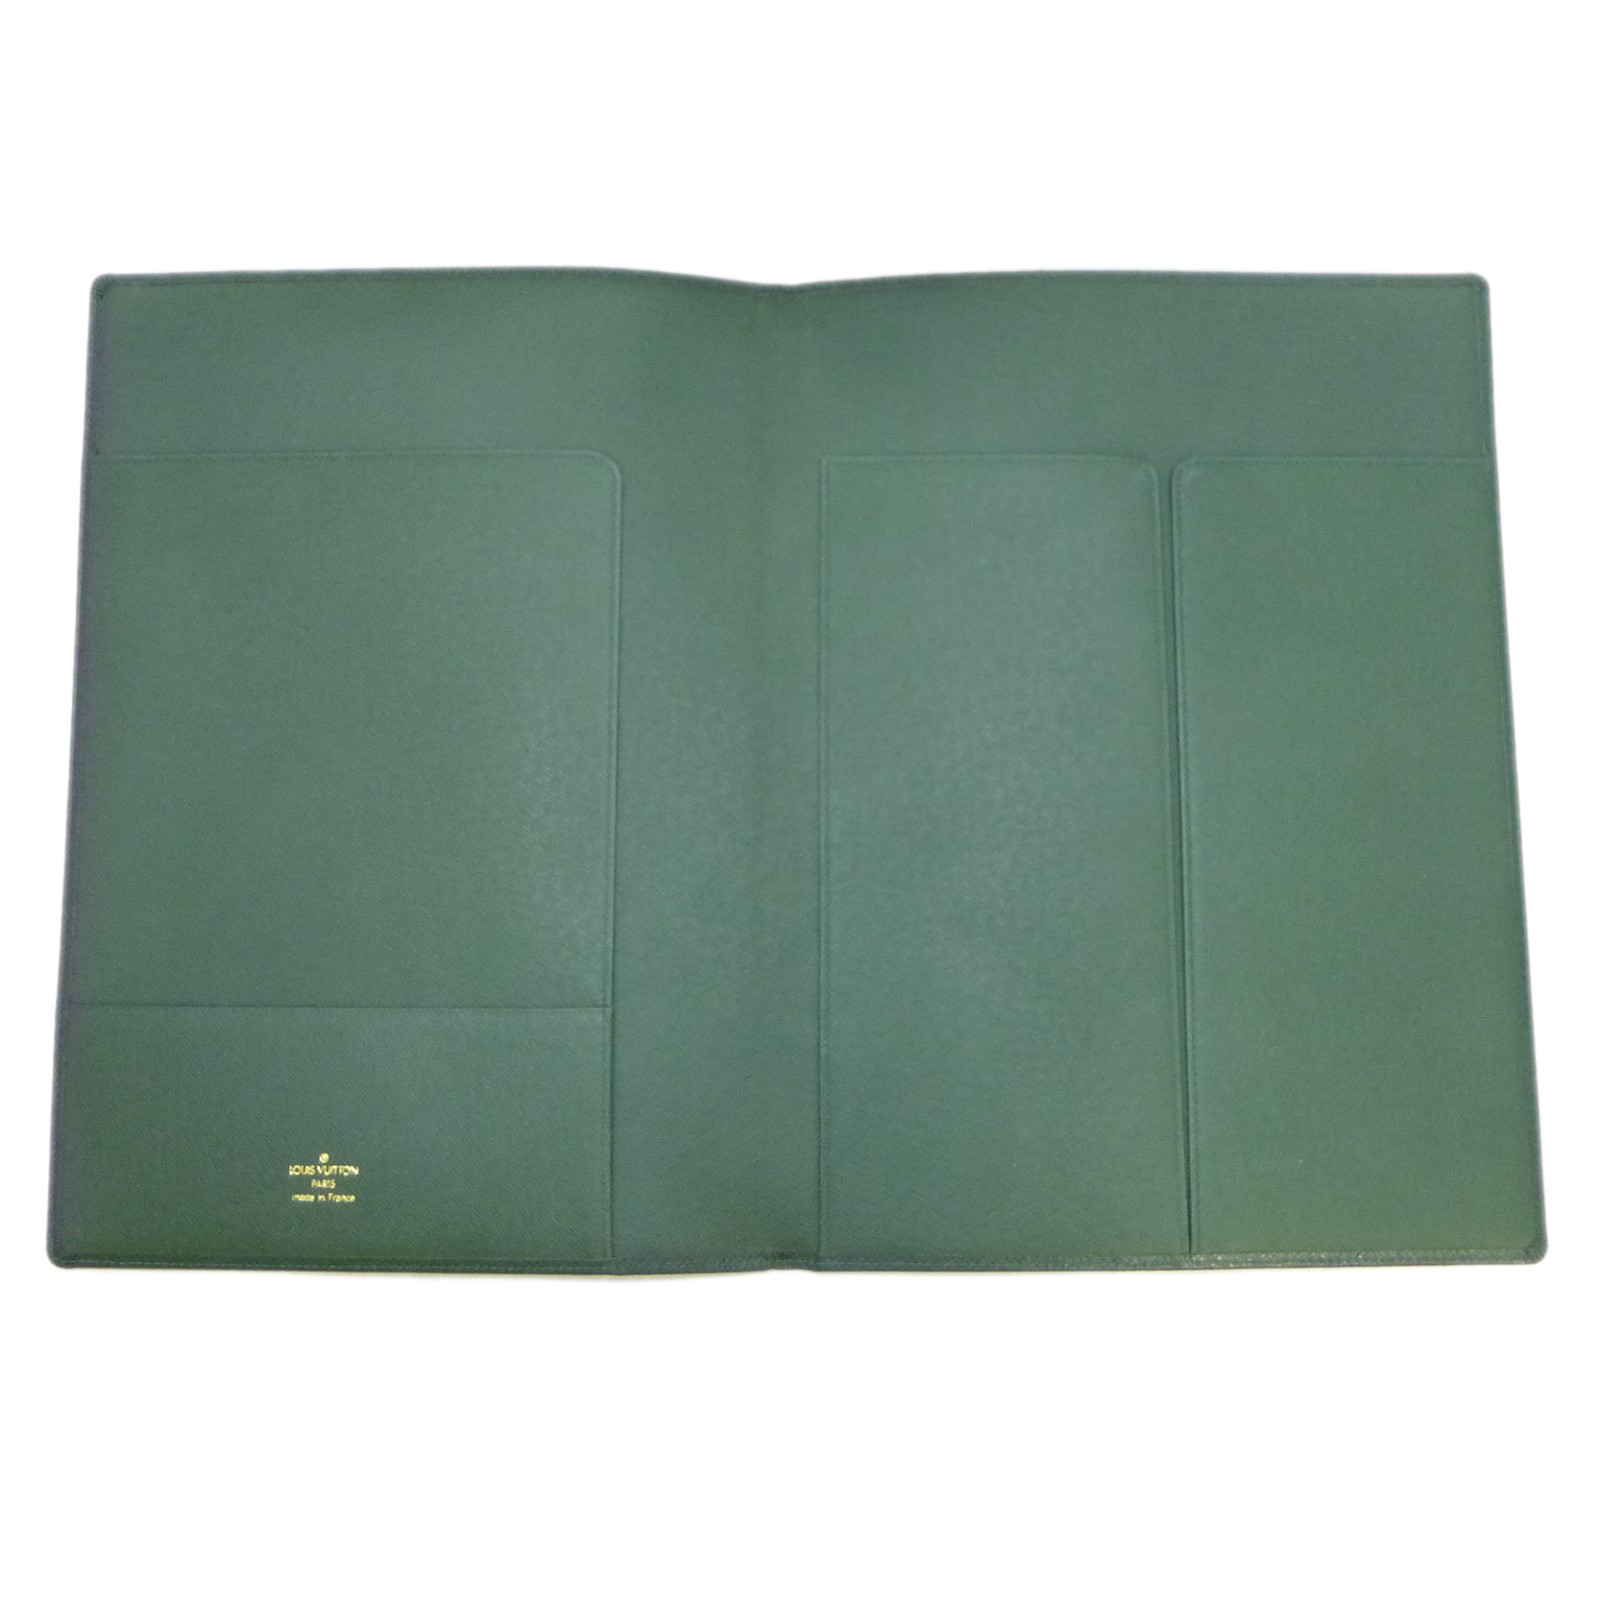 Auth LOUIS VUITTON Couverture Bloc Notebook Cover with Refill R20410 #S406118 | eBay